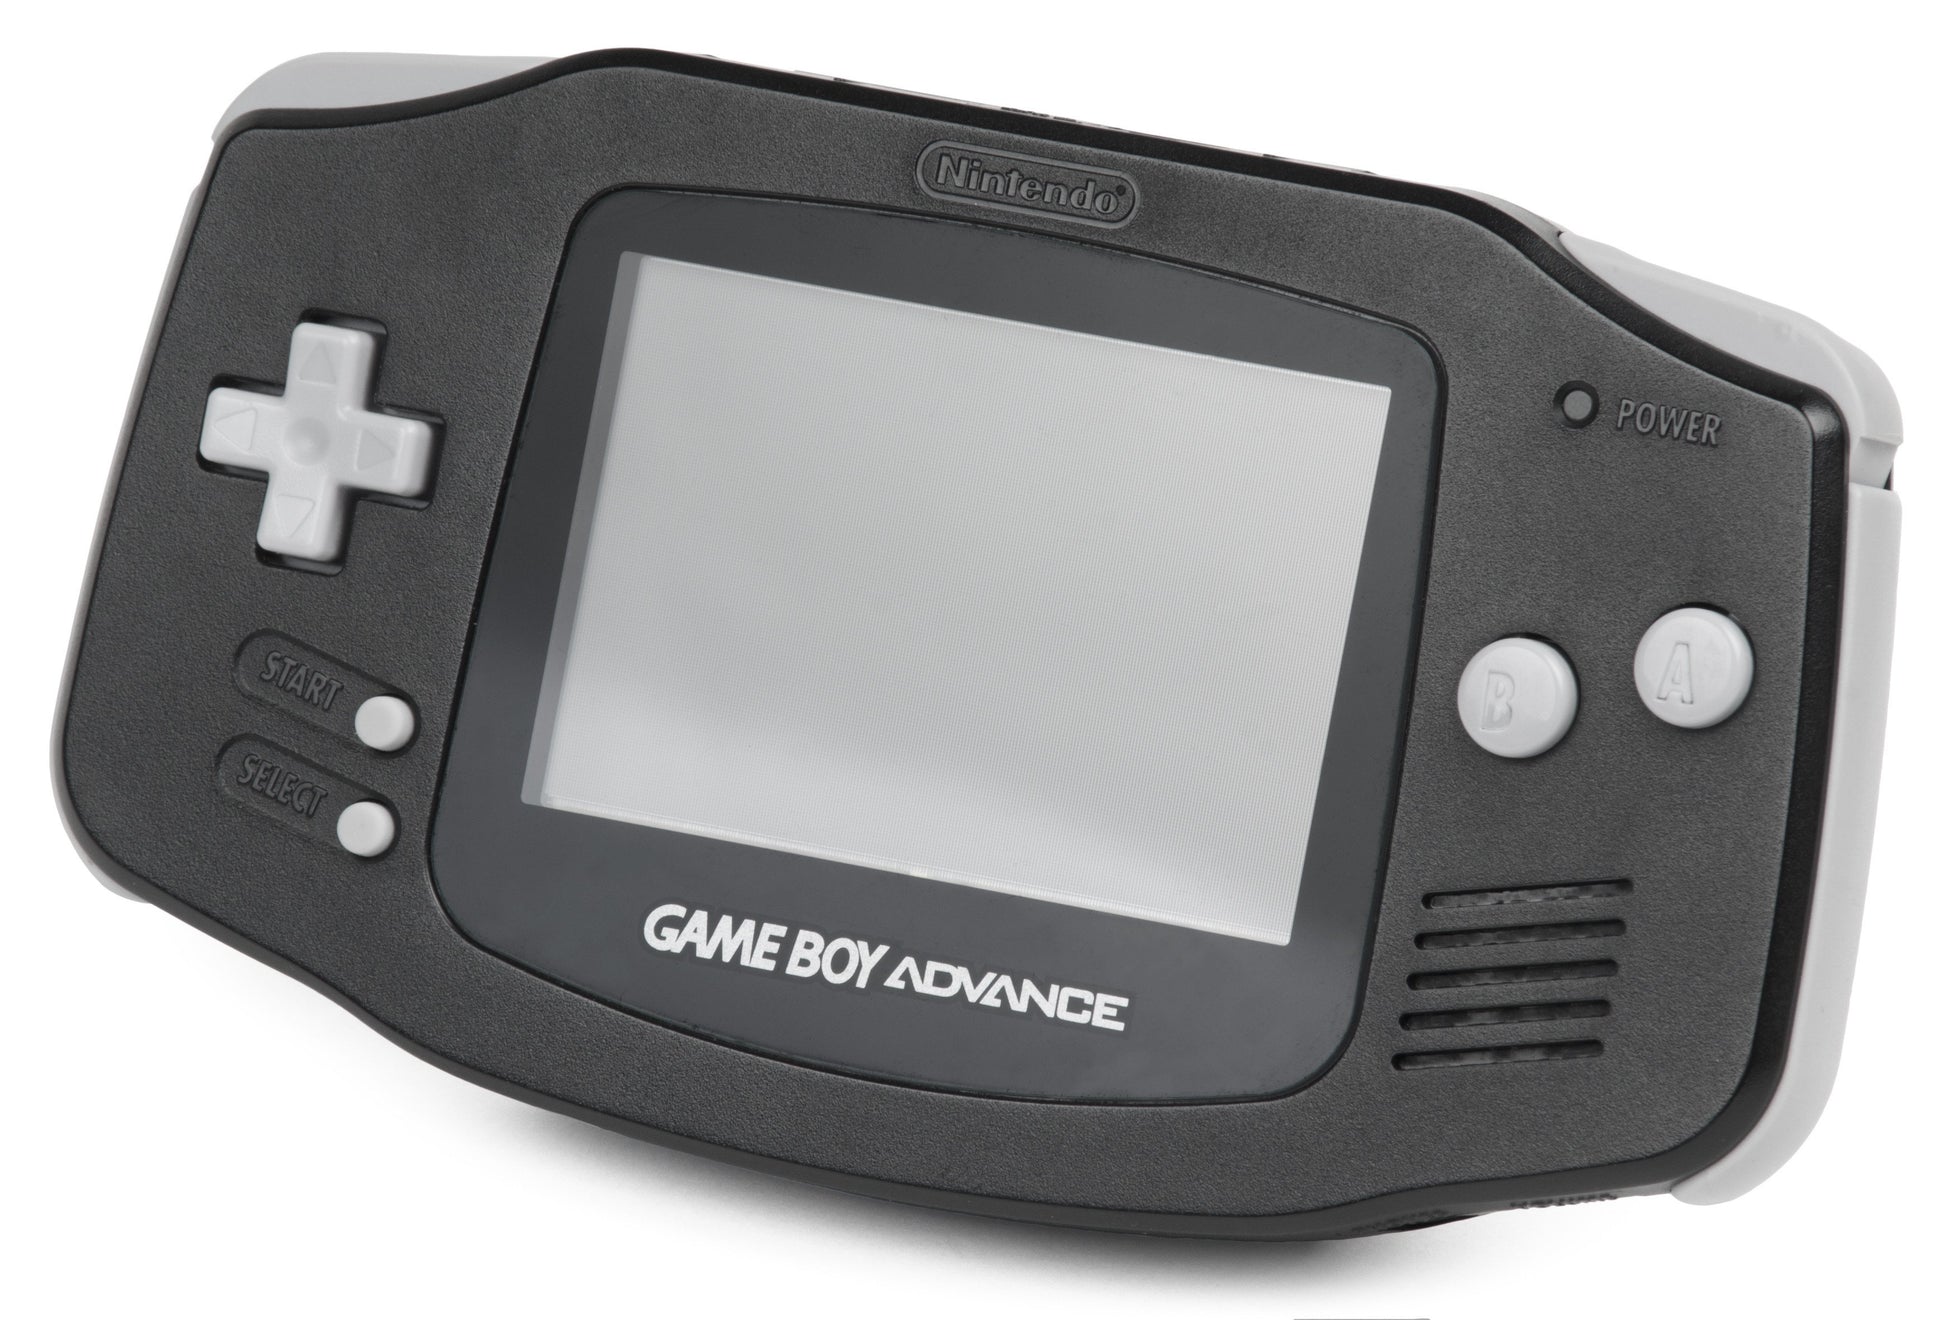 J2Games.com | Black Gameboy Advance System (Gameboy Advance) (Pre-Played - Game Only).